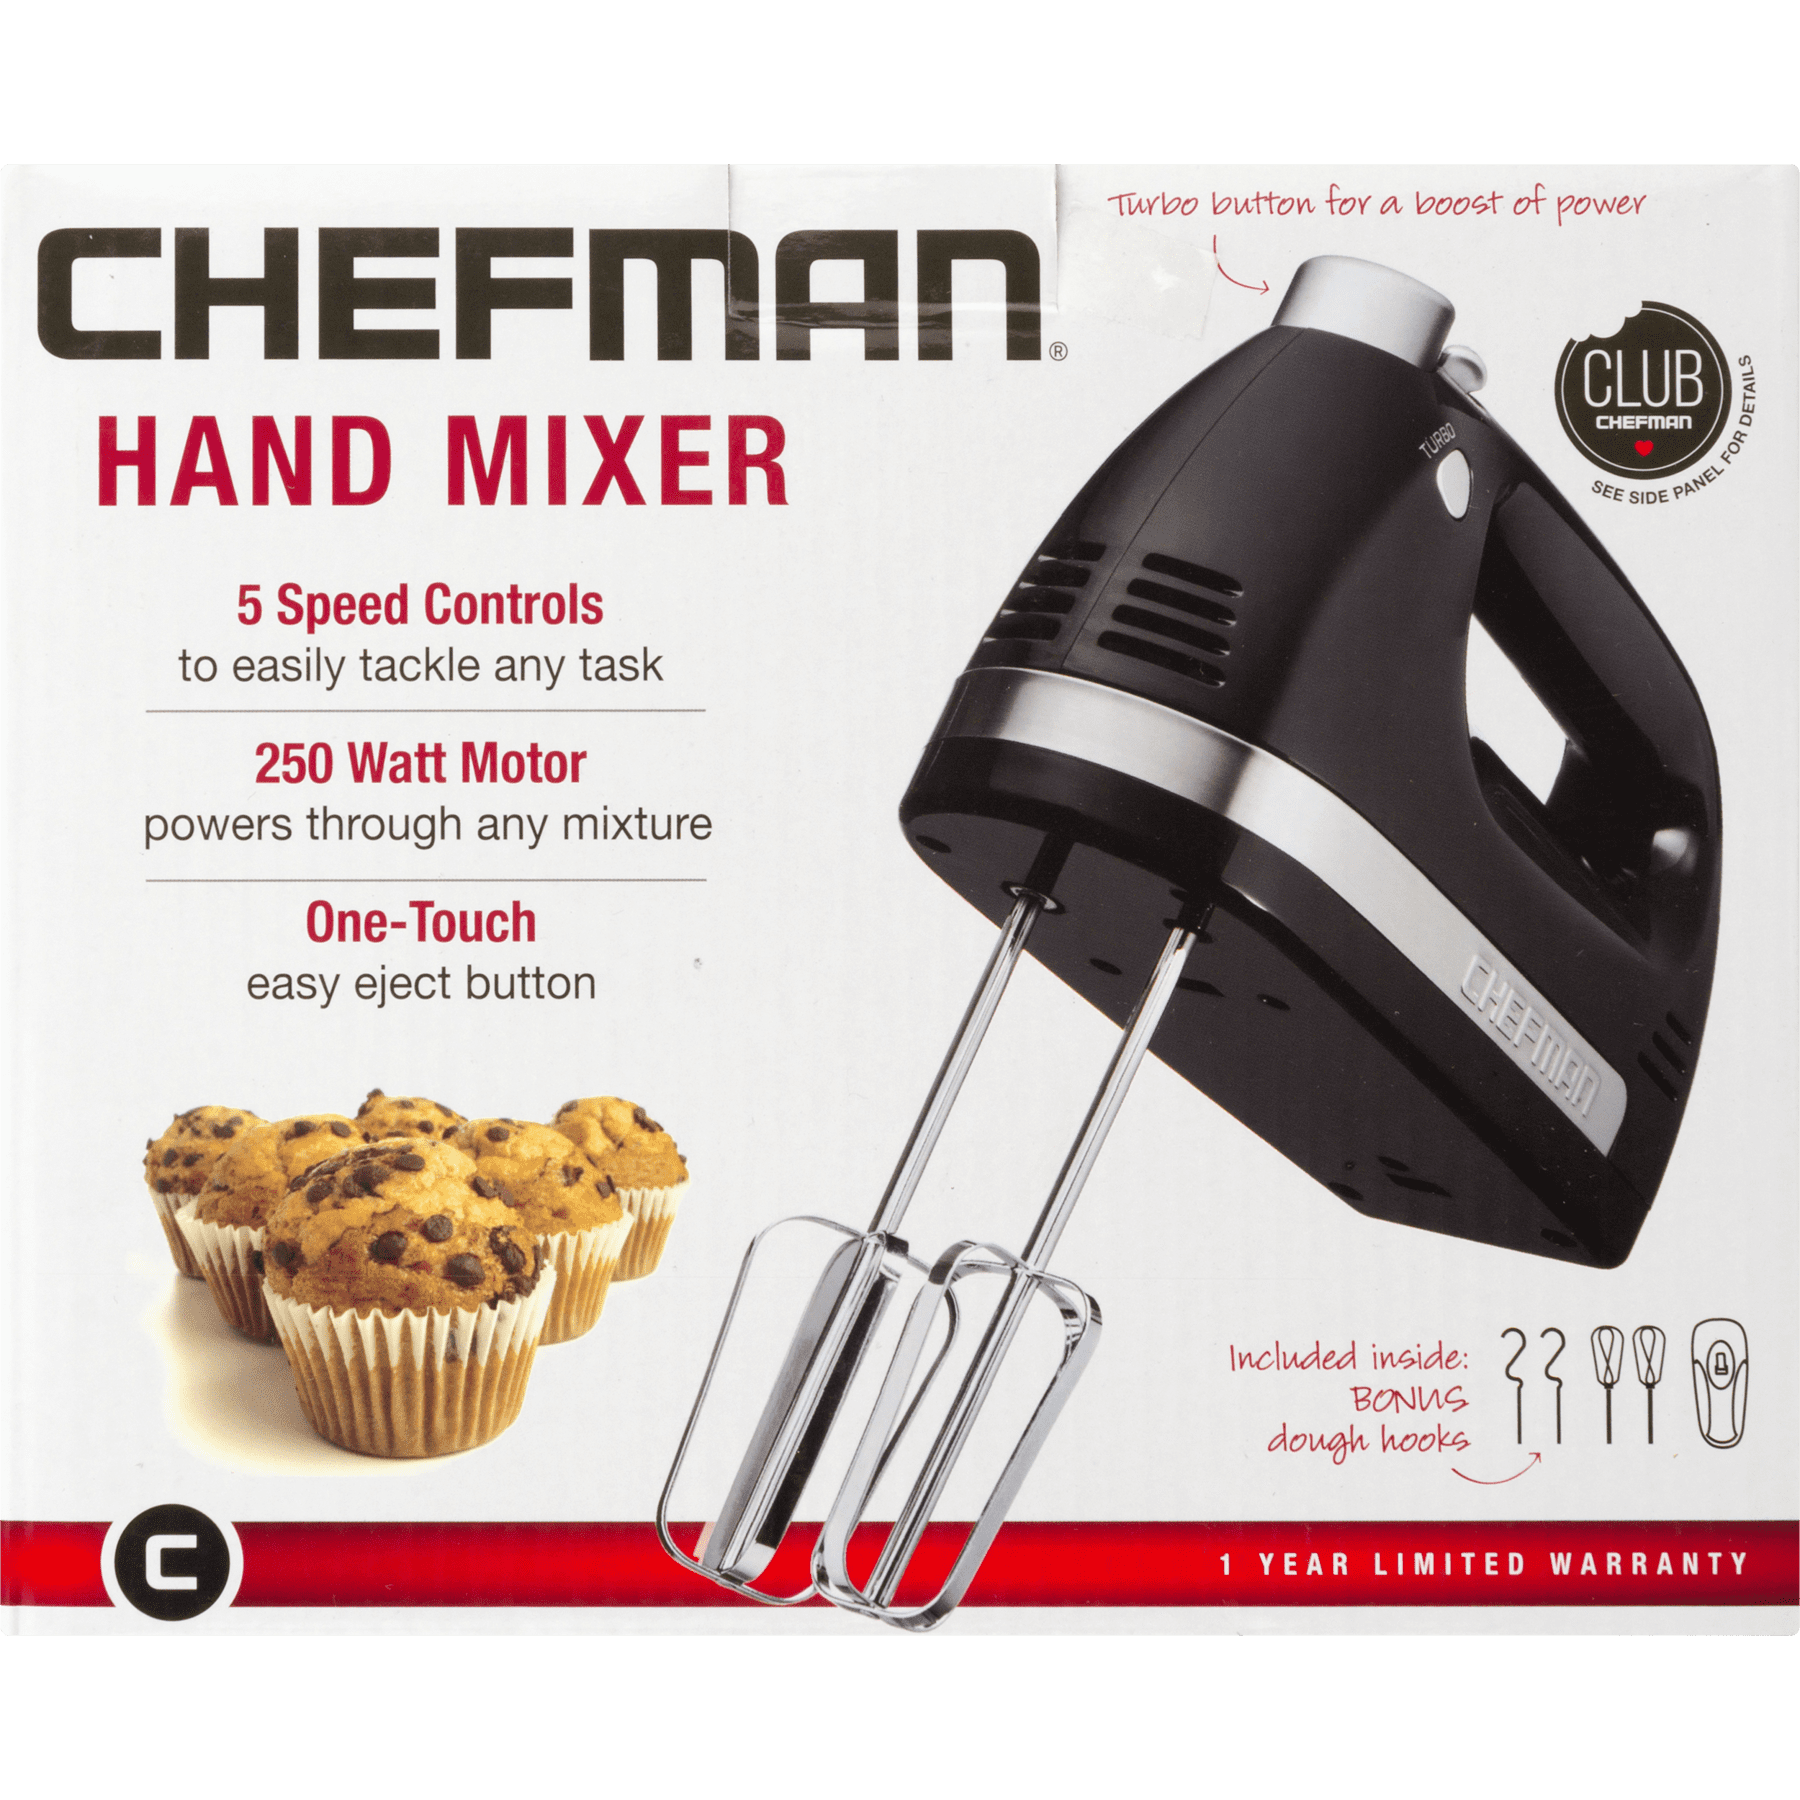 Chefman Turbo Power Hand Mixer with One-Touch Easy Eject Button RJ17-V2-Red Chrome Plated Beaters and FREE Bonus Dough Hooks Included 